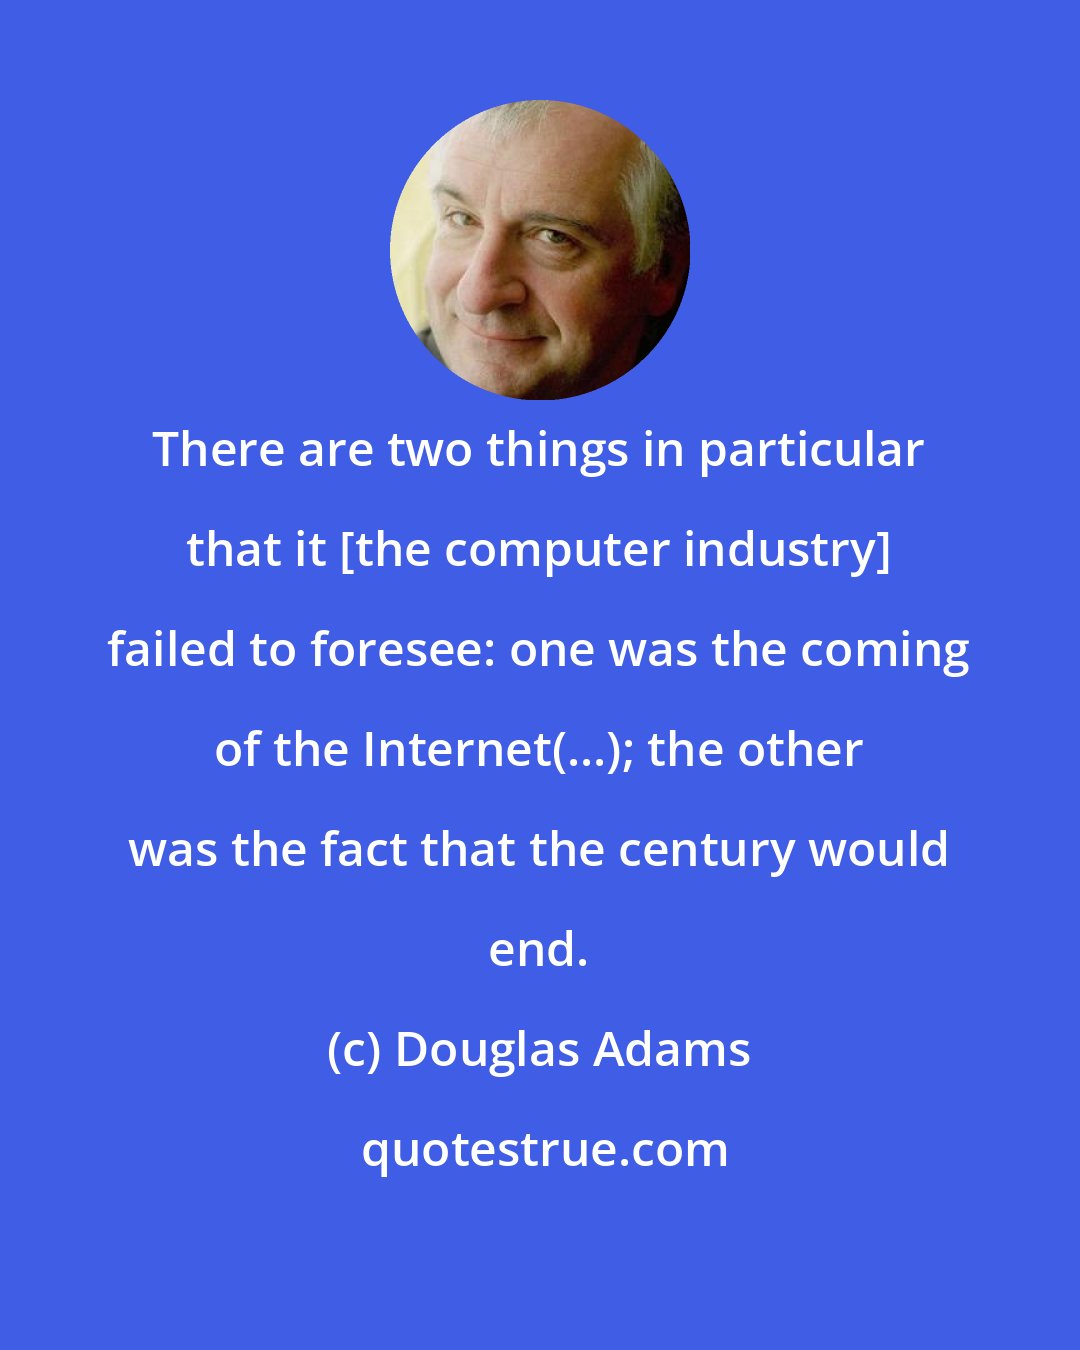 Douglas Adams: There are two things in particular that it [the computer industry] failed to foresee: one was the coming of the Internet(...); the other was the fact that the century would end.